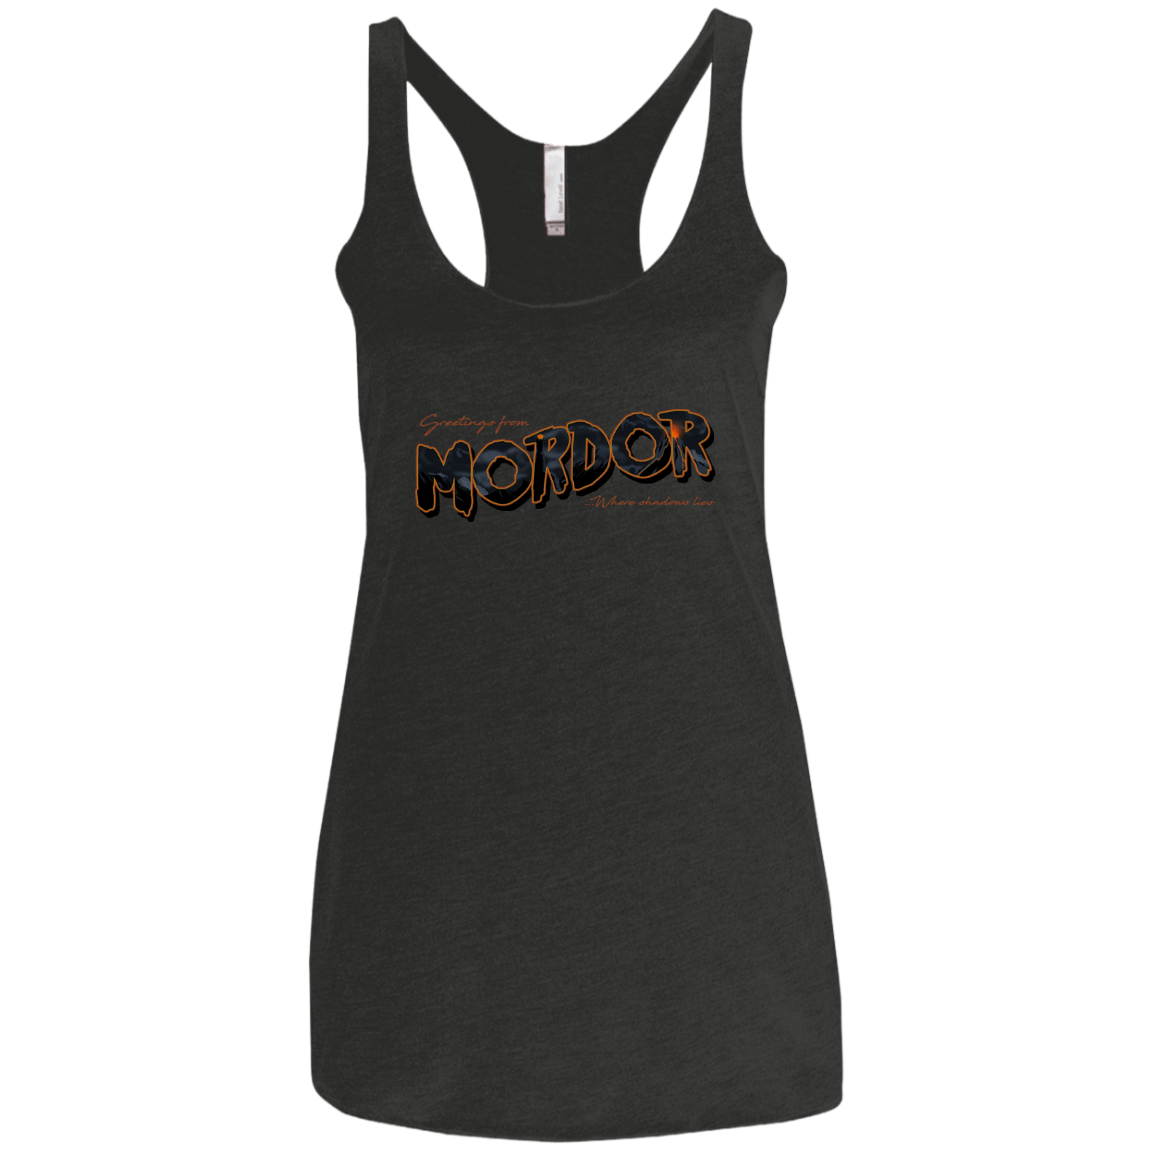 T-Shirts Vintage Black / X-Small Greetings From Mordor Women's Triblend Racerback Tank